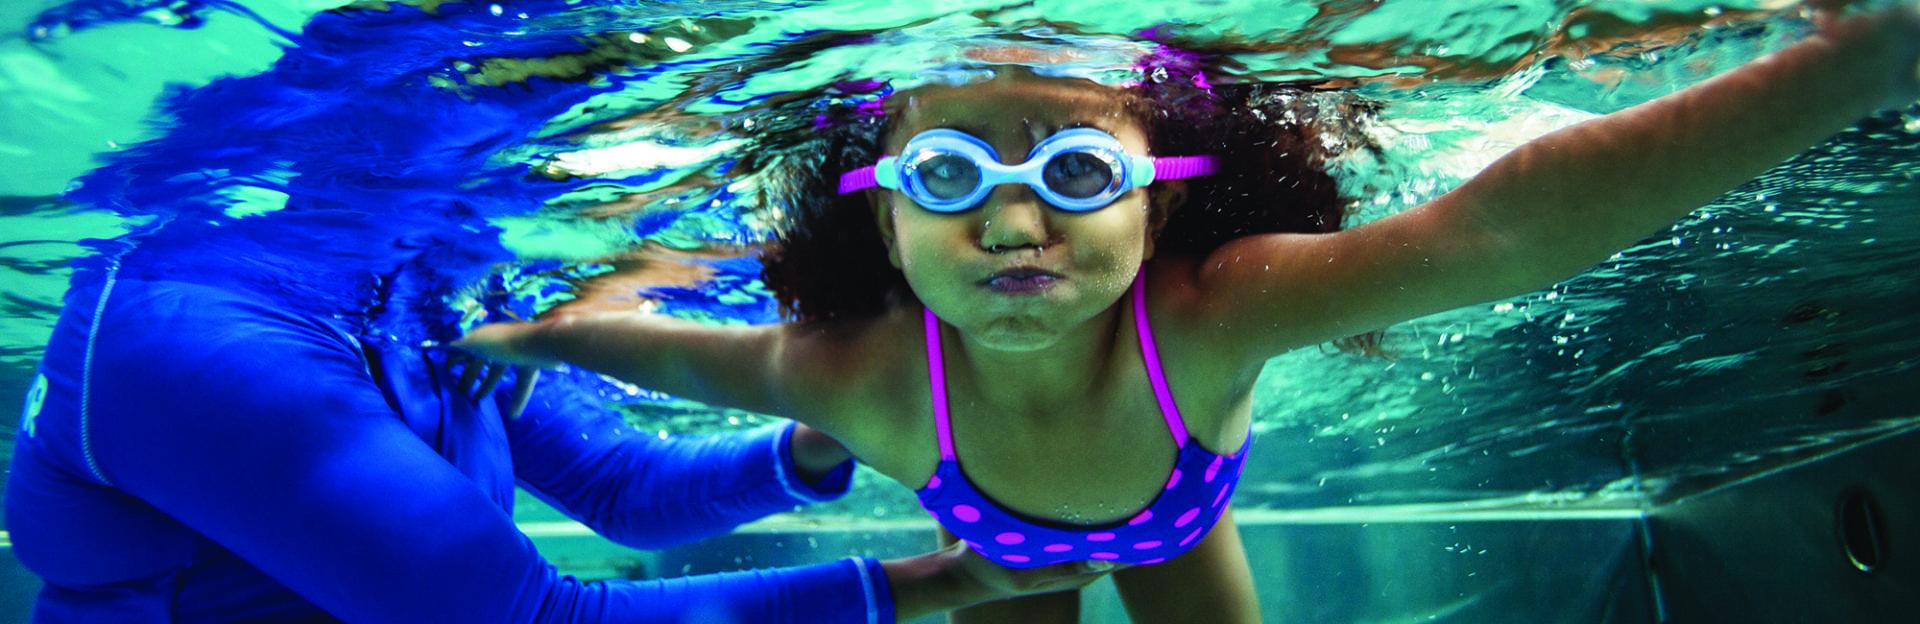 Underwater image of a young girl taking swim lessons